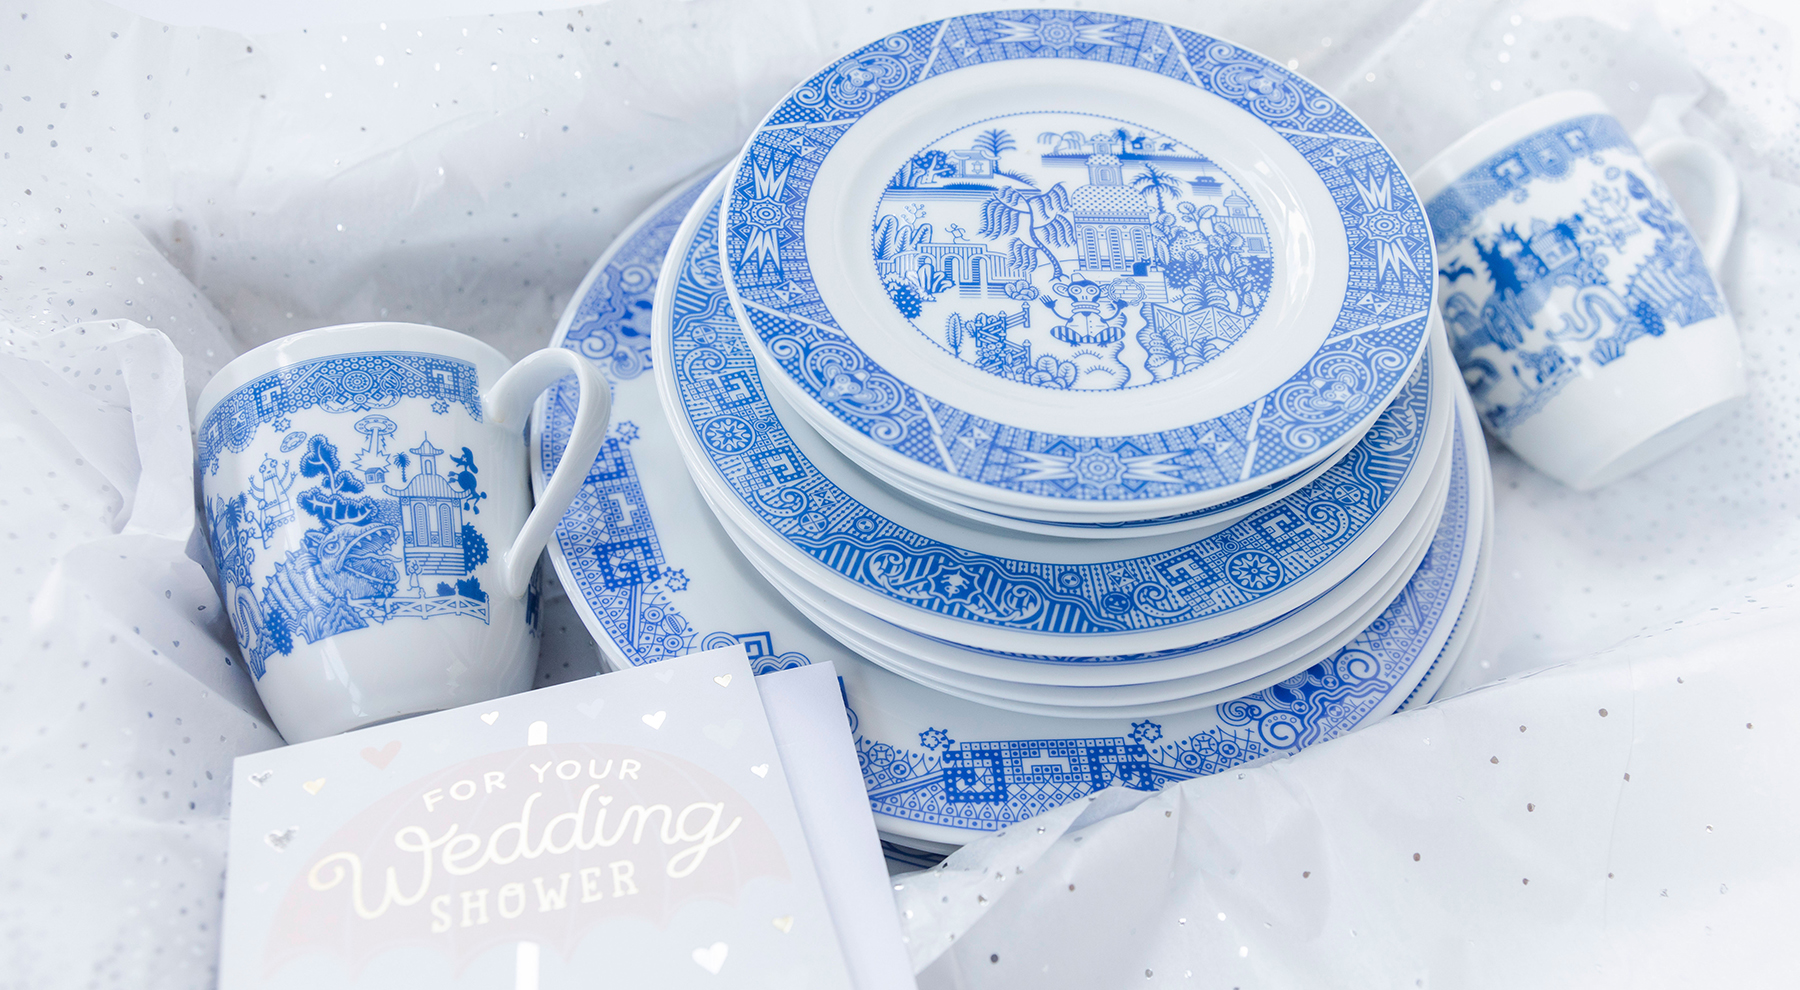 Calamityware Dinner Set and Petite Plates in gift box with Wedding Card